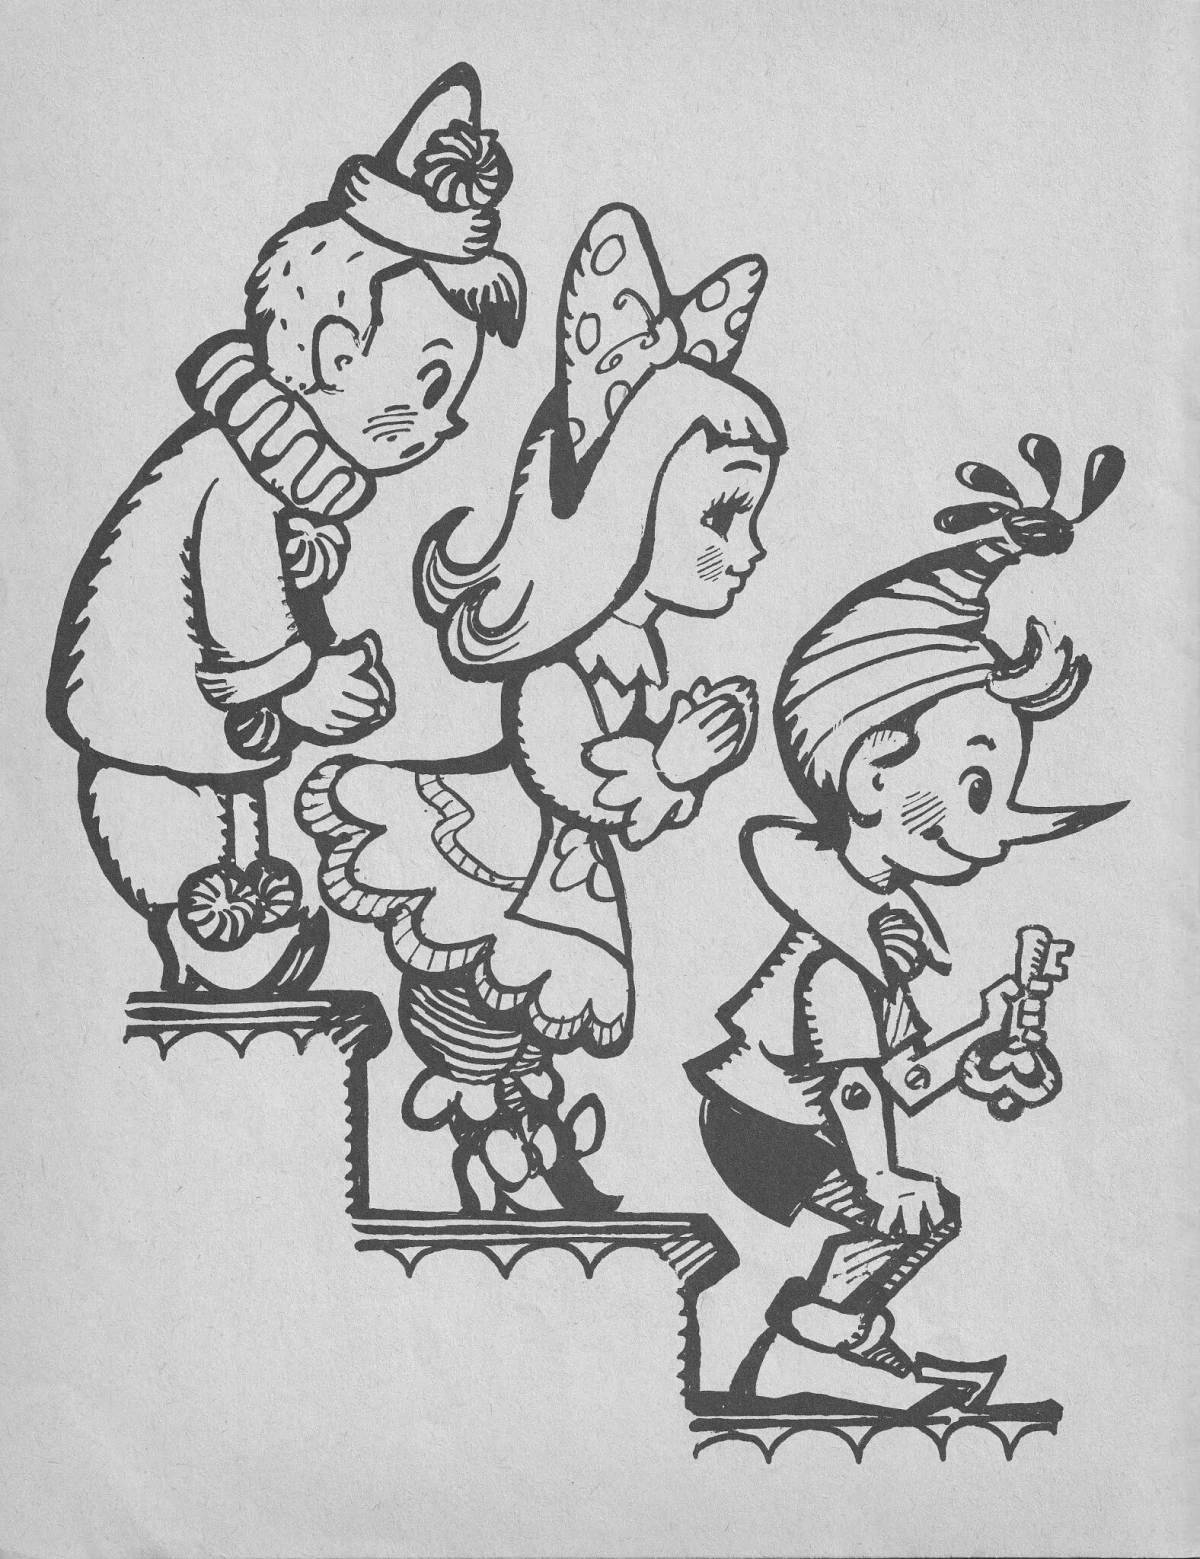 Charming pinocchio and his friends